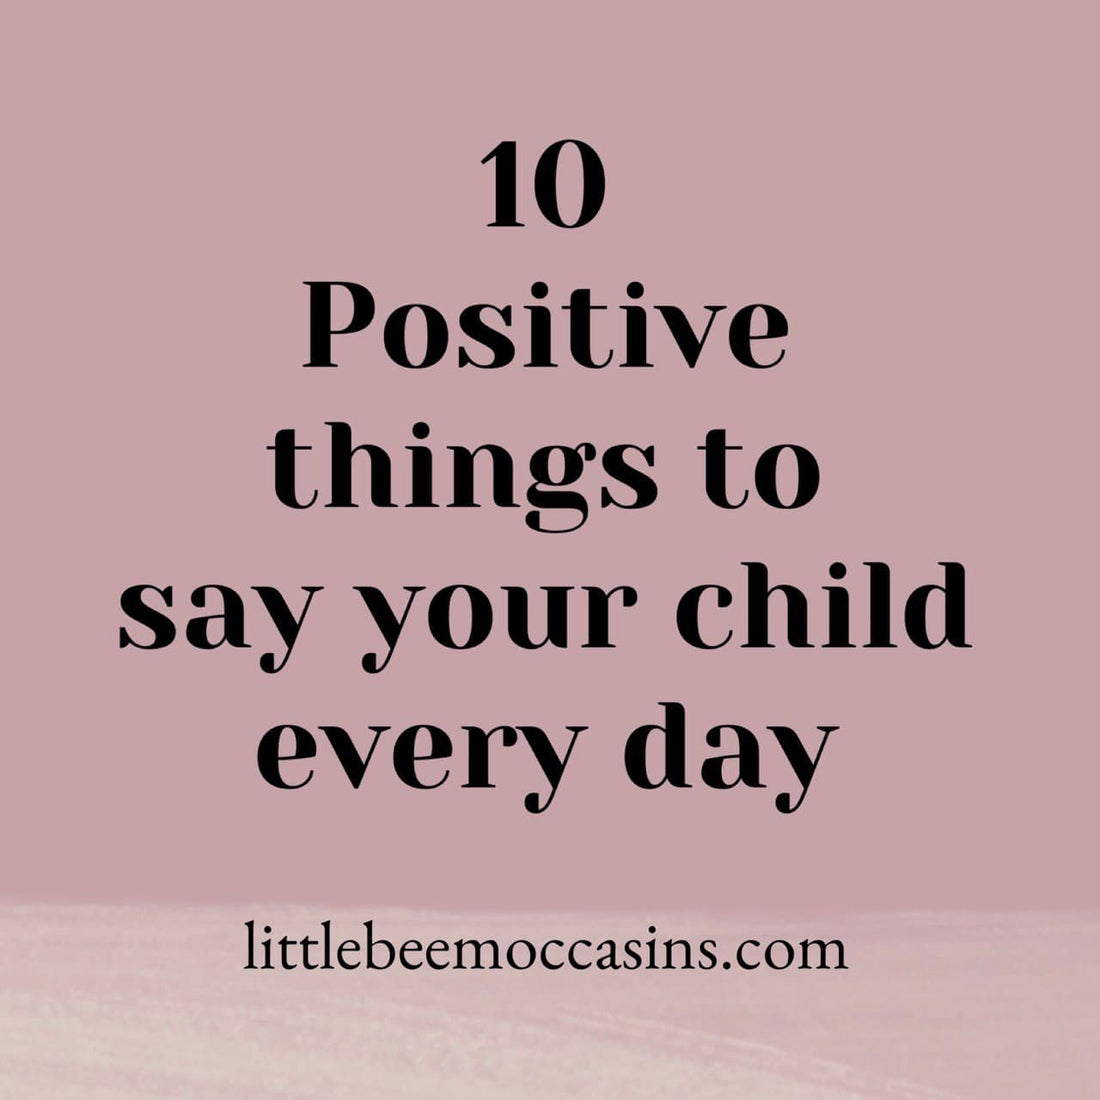 Positive things to say your child every day